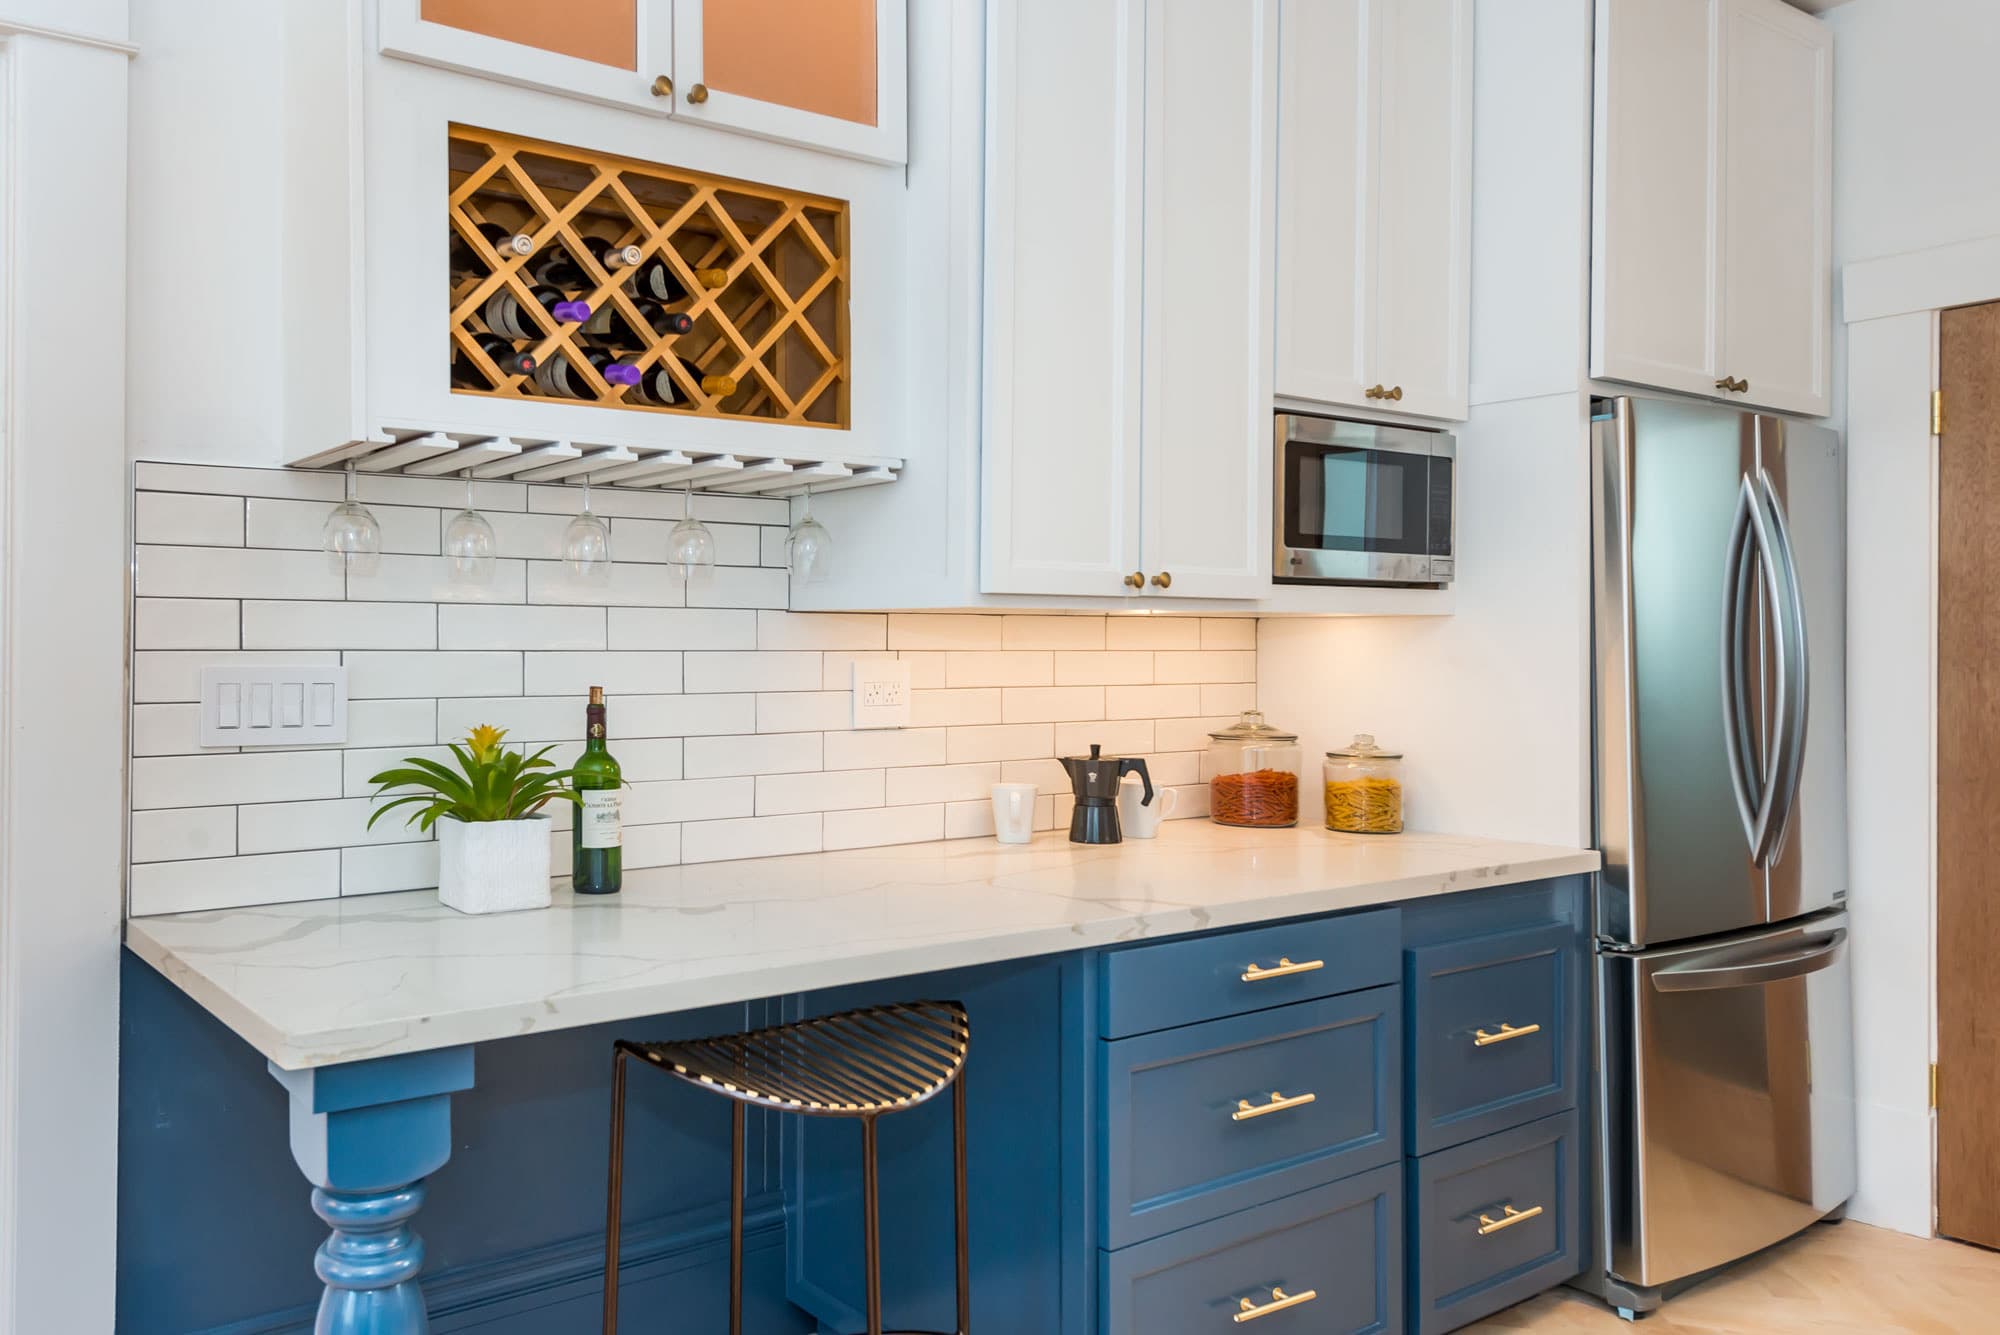 Enjoy a glass of wine from a bottle from 714 Page's updated kitchen the is as functional as it is beautiful.